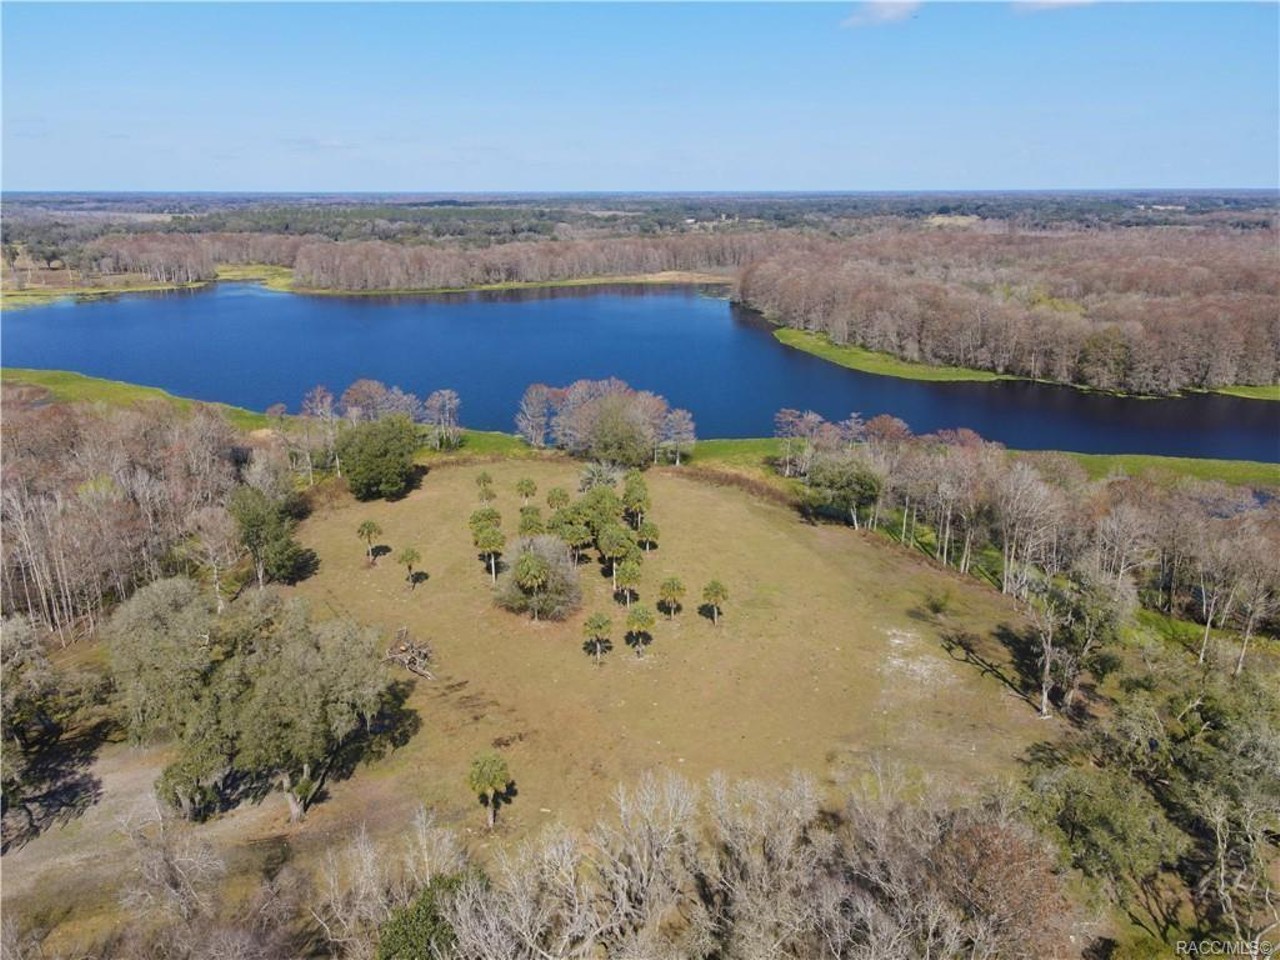 This 620-acre ranch in Citrus County comes with terrestrial caves and a private lake